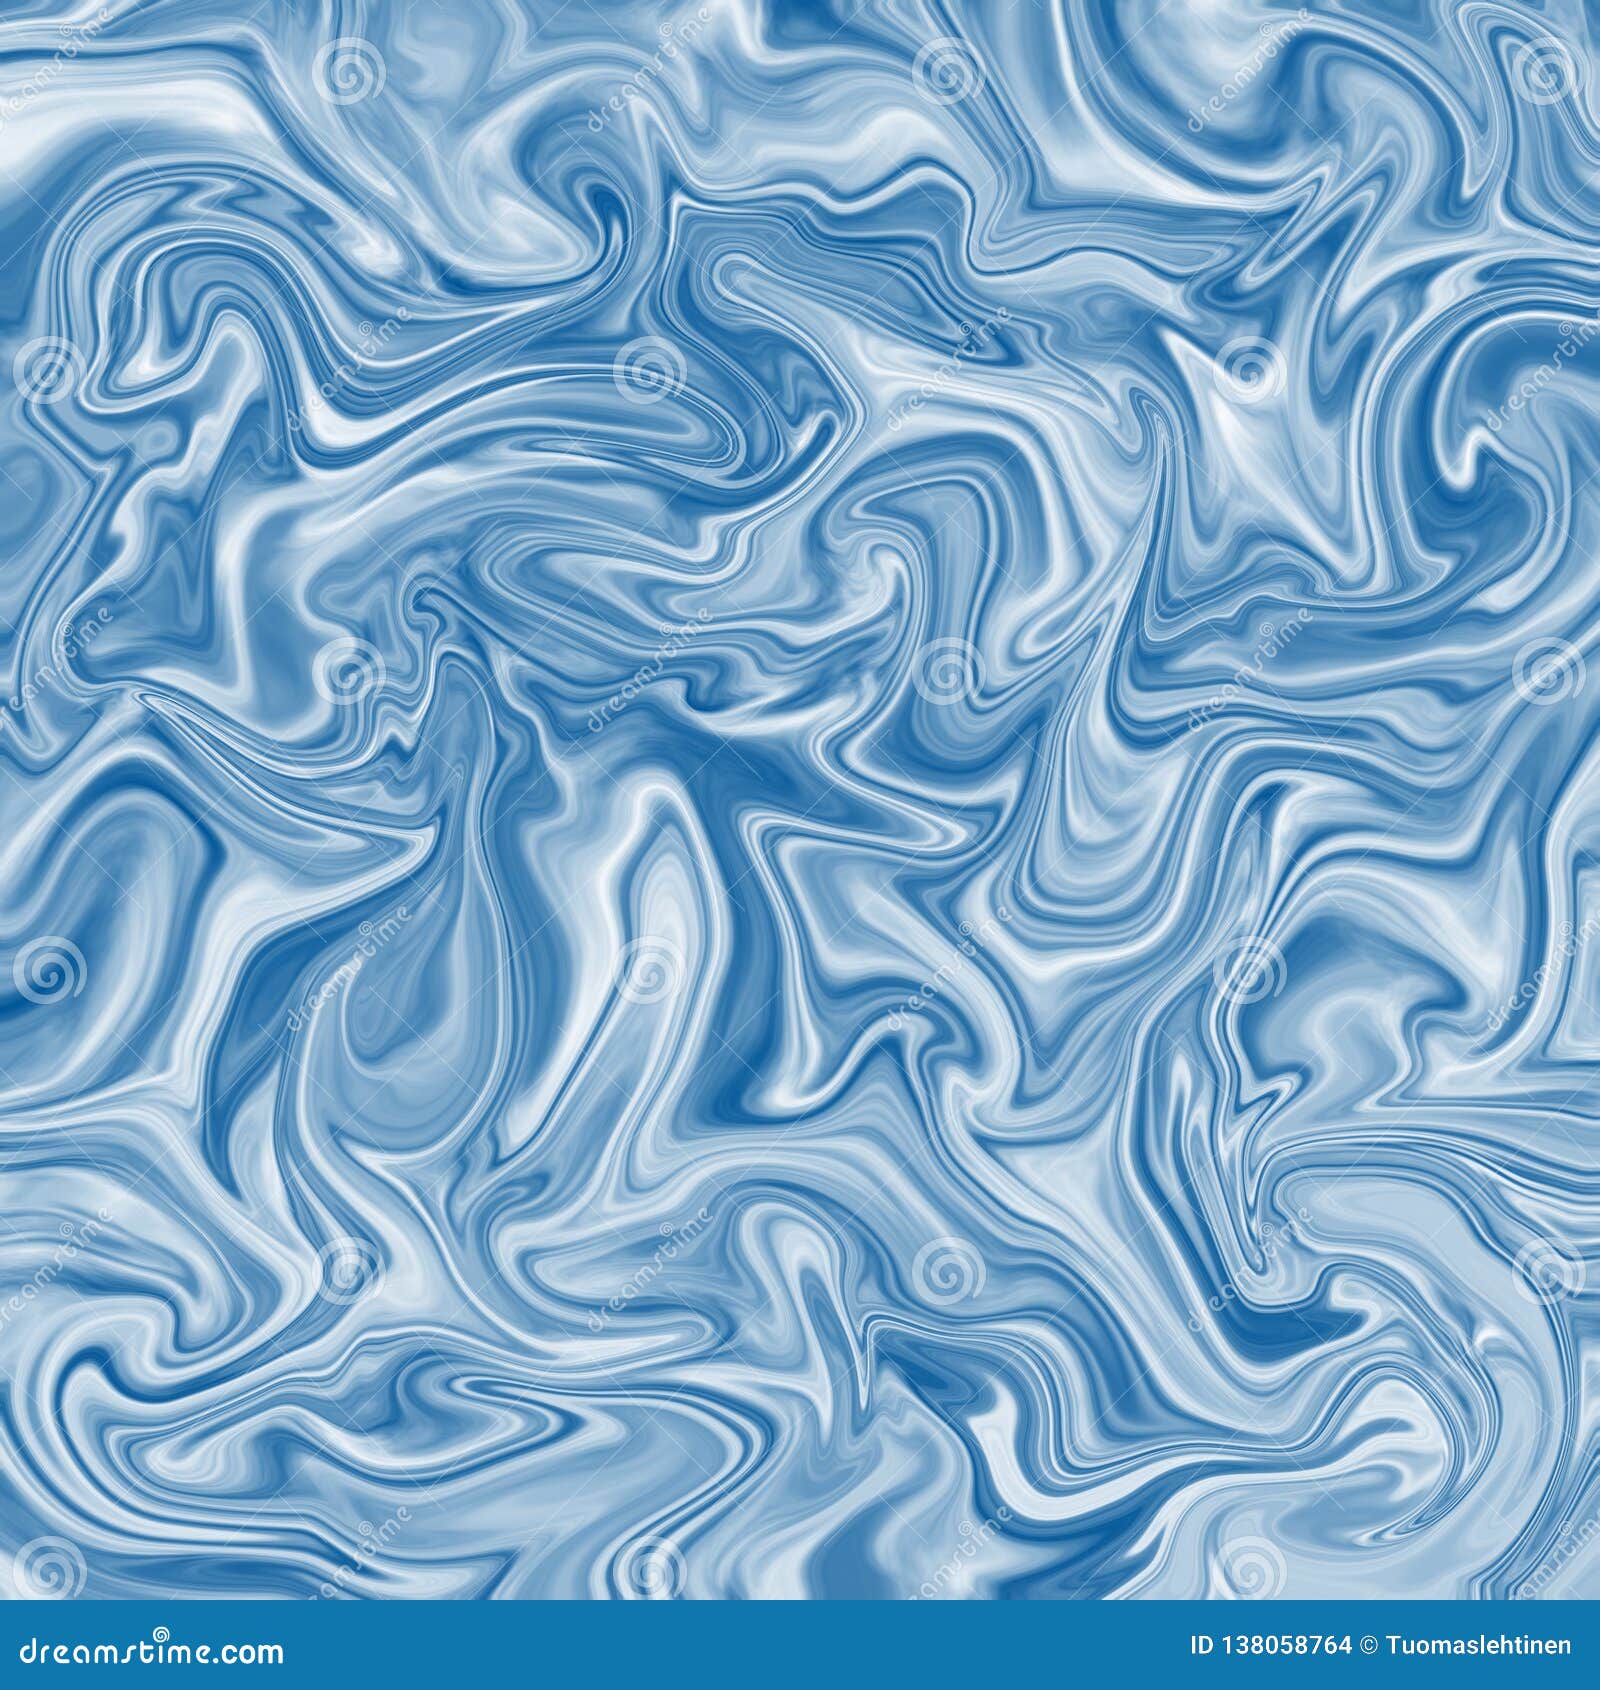 Abstract Light Blue Fluid Waves Background Stock Illustration -  Illustration of decoration, graphic: 138058764